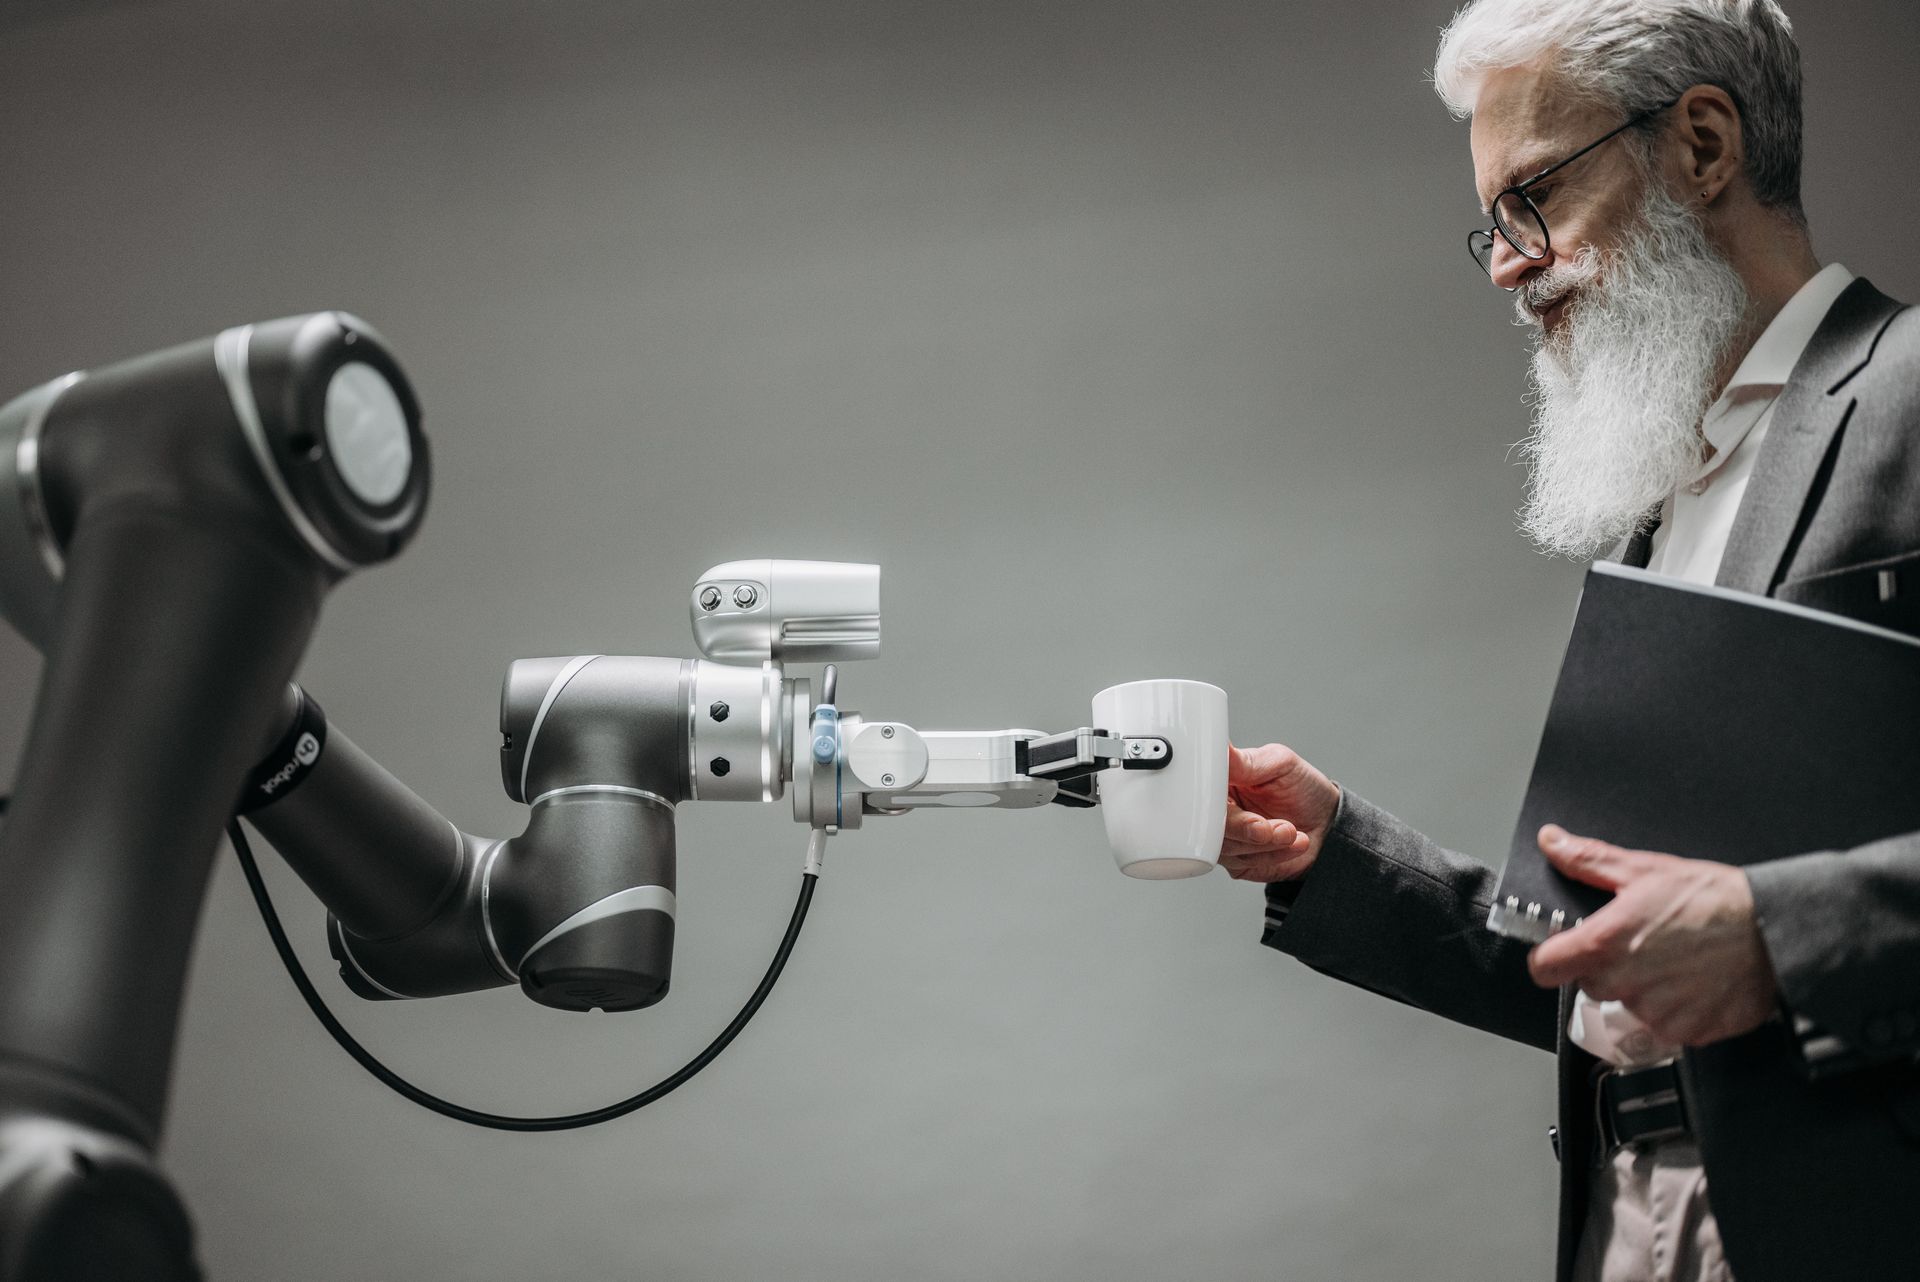 a man with a beard is holding a cup of coffee in front of a robotic arm 